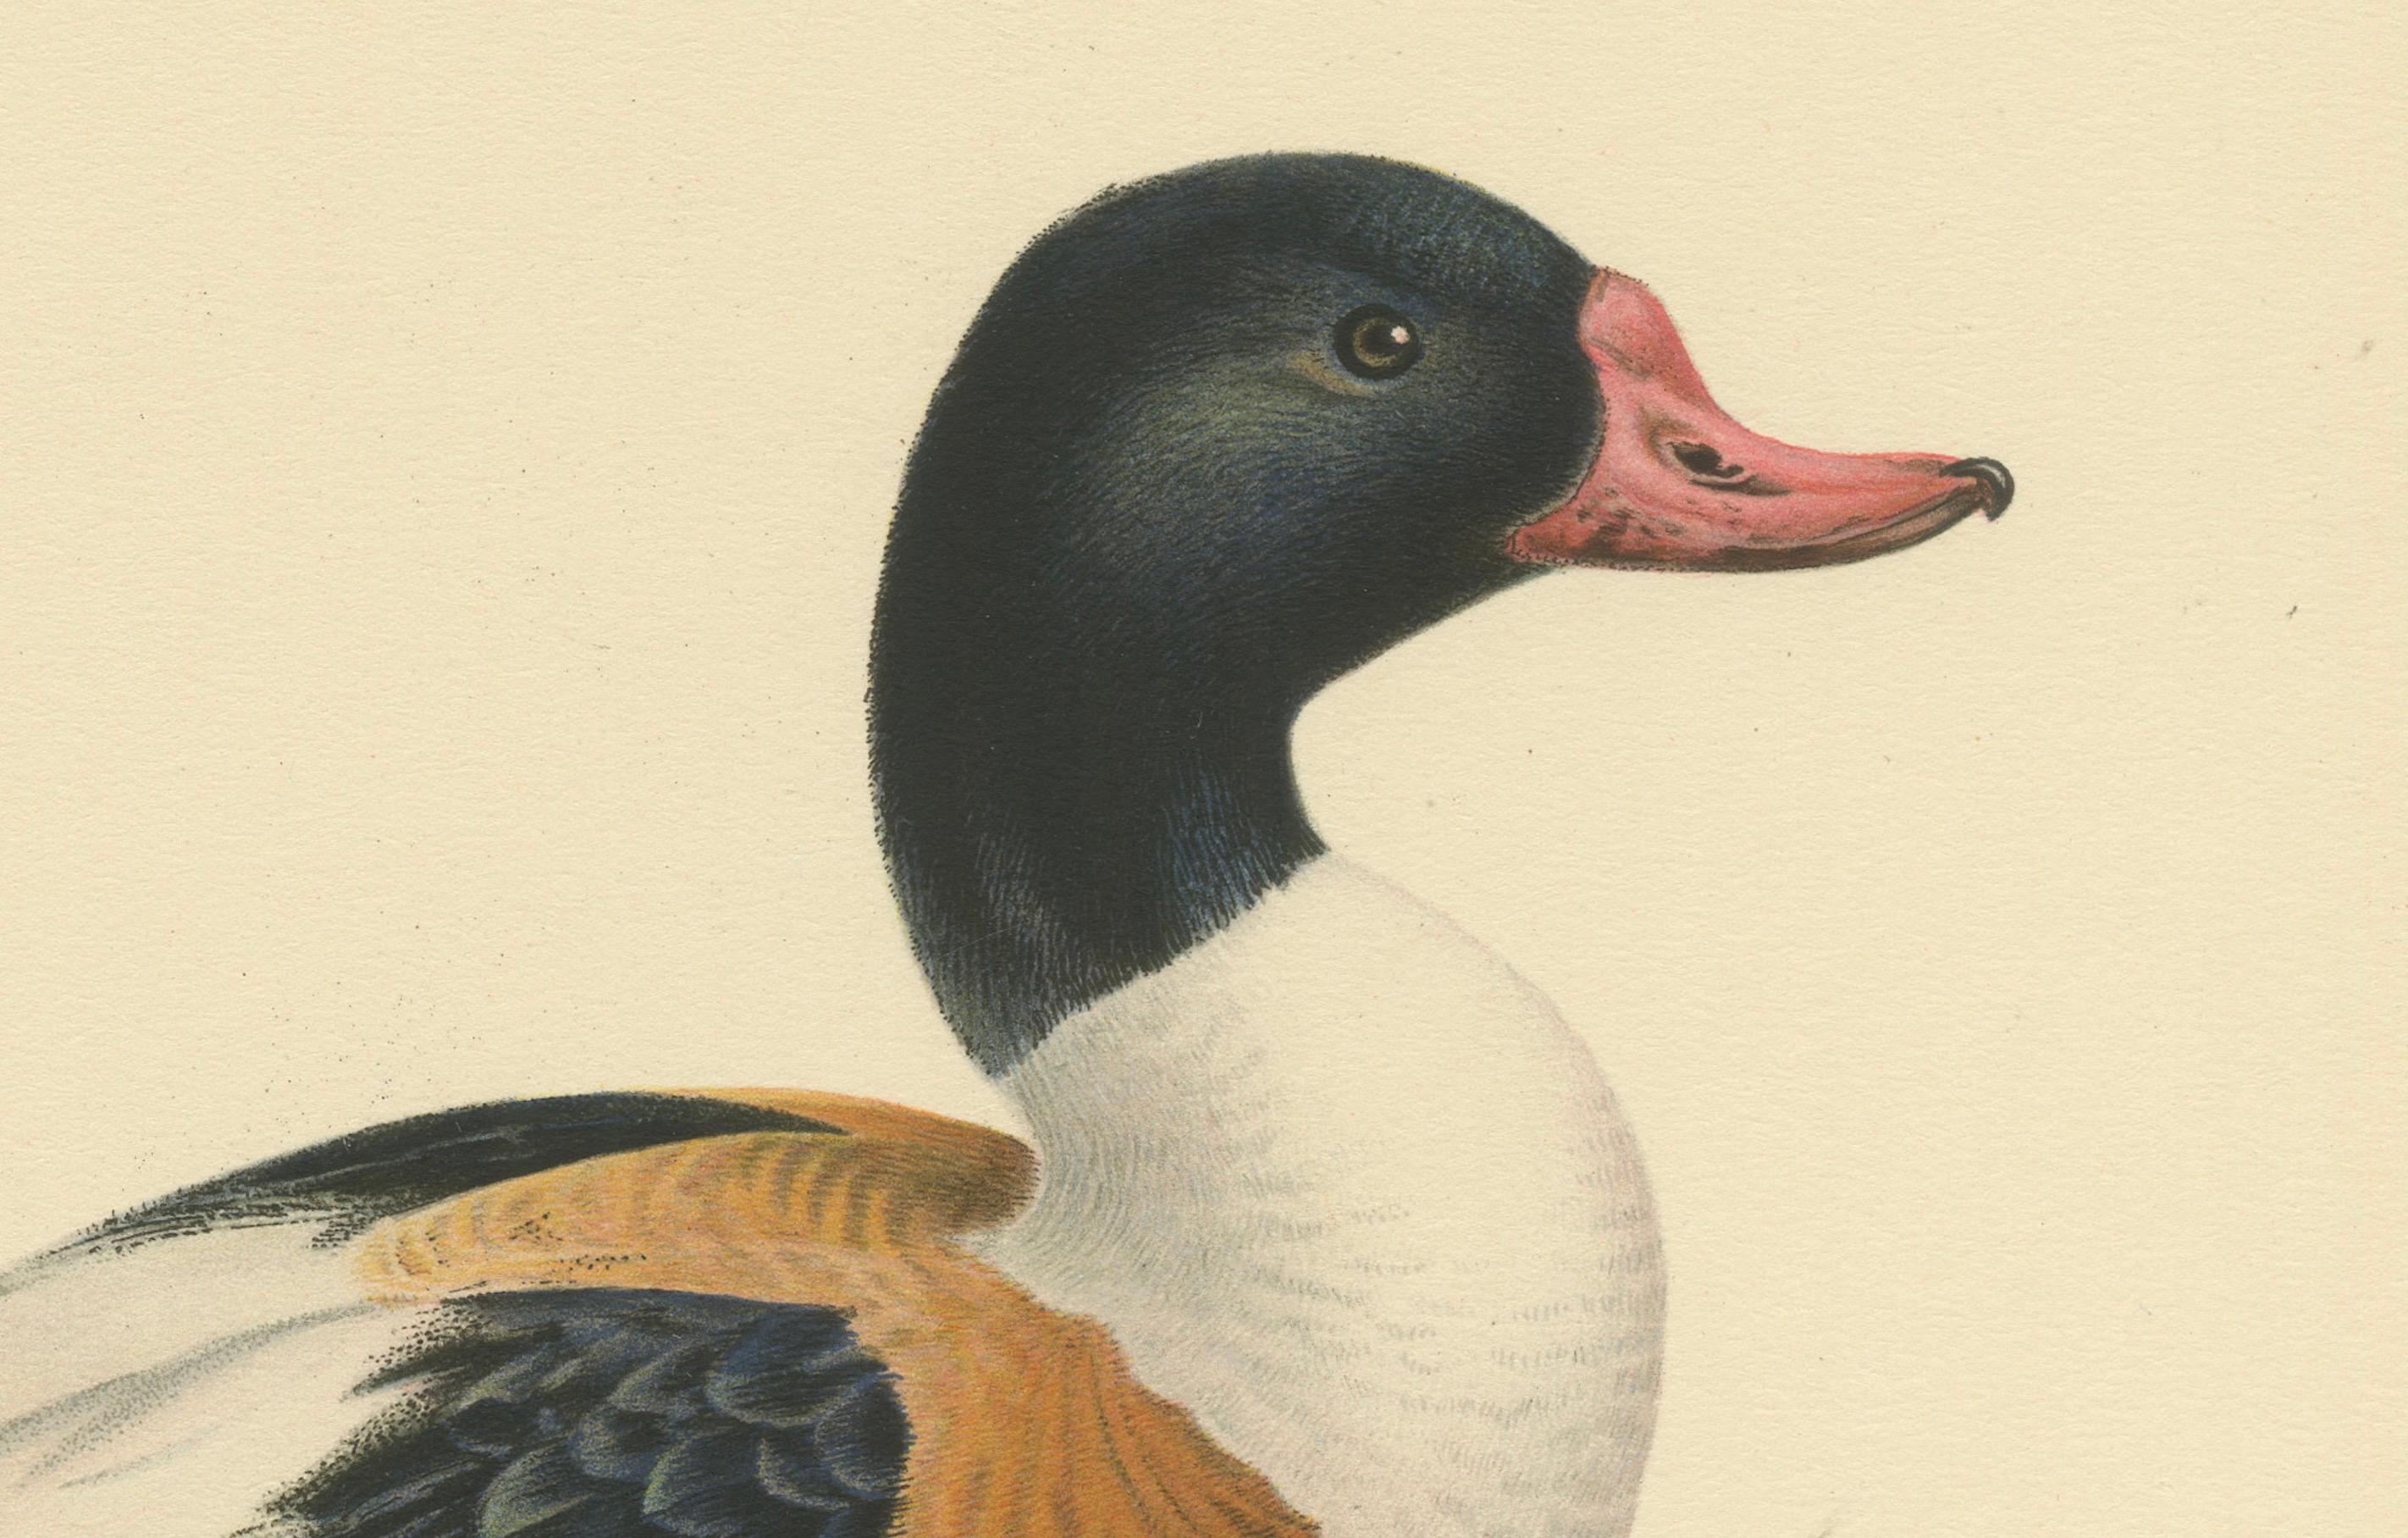 This print showcases the Common Shelduck, known scientifically as Tadorna tadorna, rendered with an impressive degree of detail and naturalistic color. The shelduck stands prominently, perched on a rocky base, its body turned slightly towards the